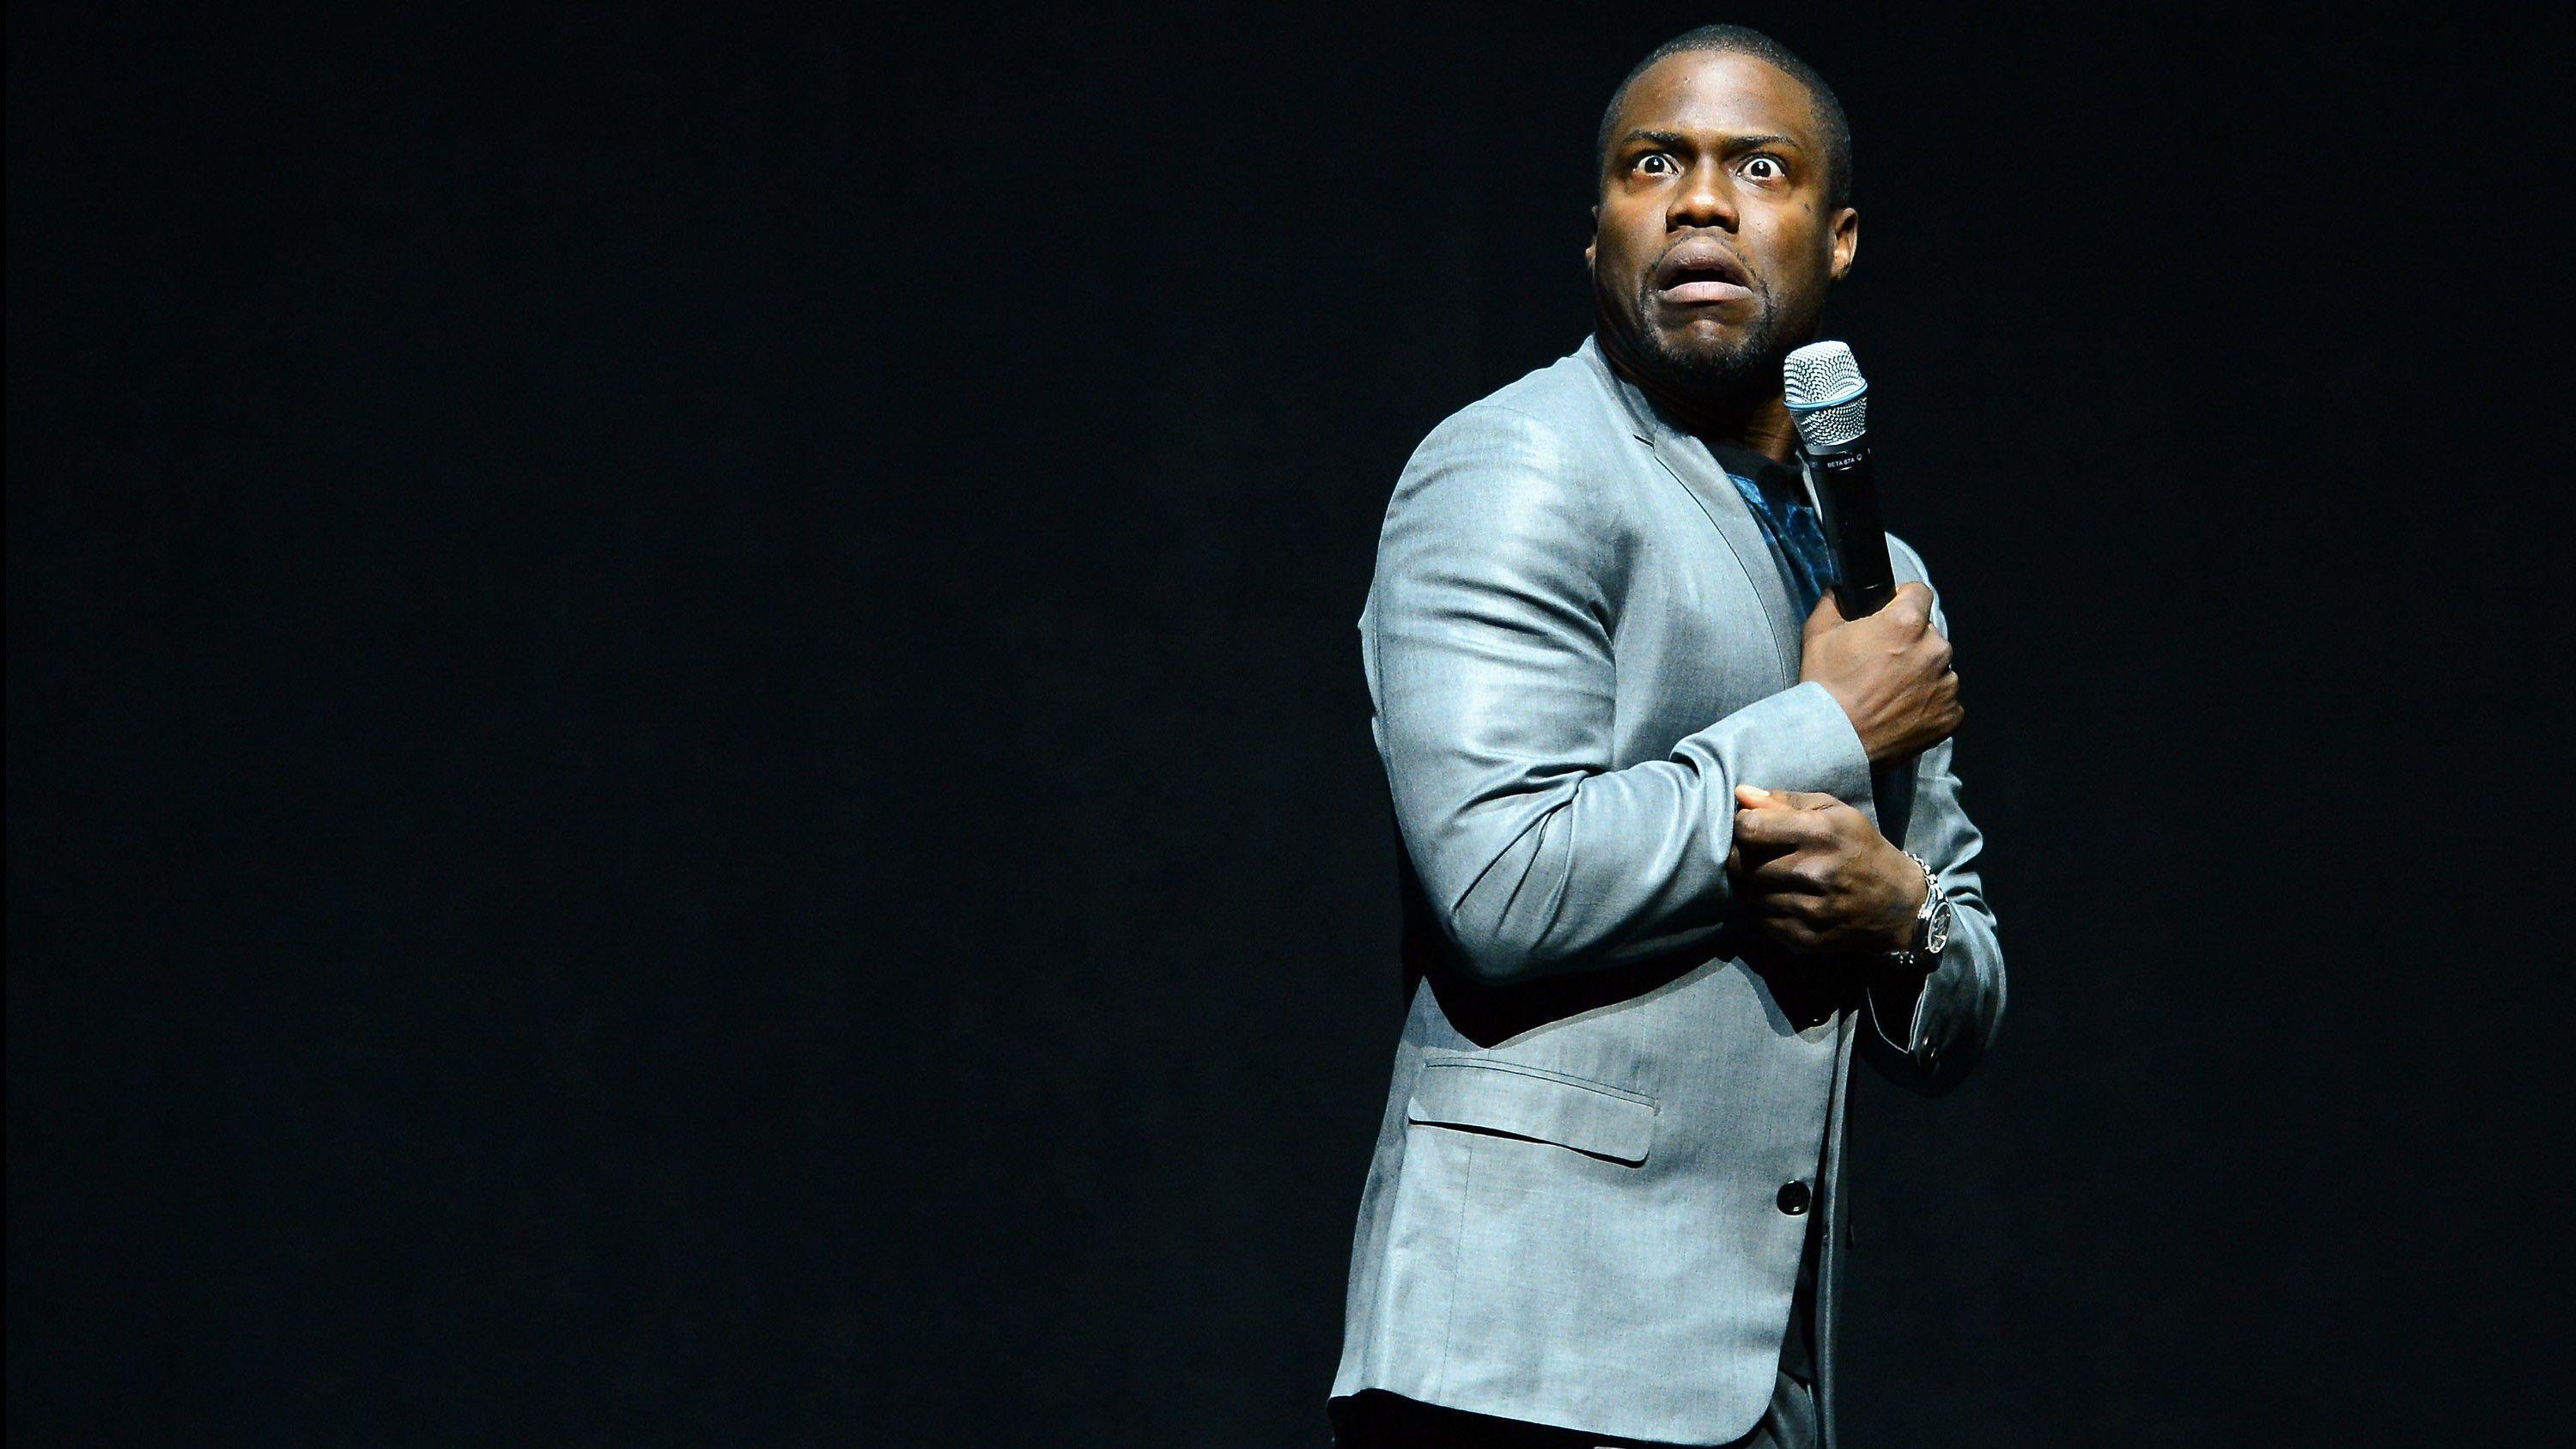 Kevin Hart Wallpapers Image Photos Pictures Backgrounds.